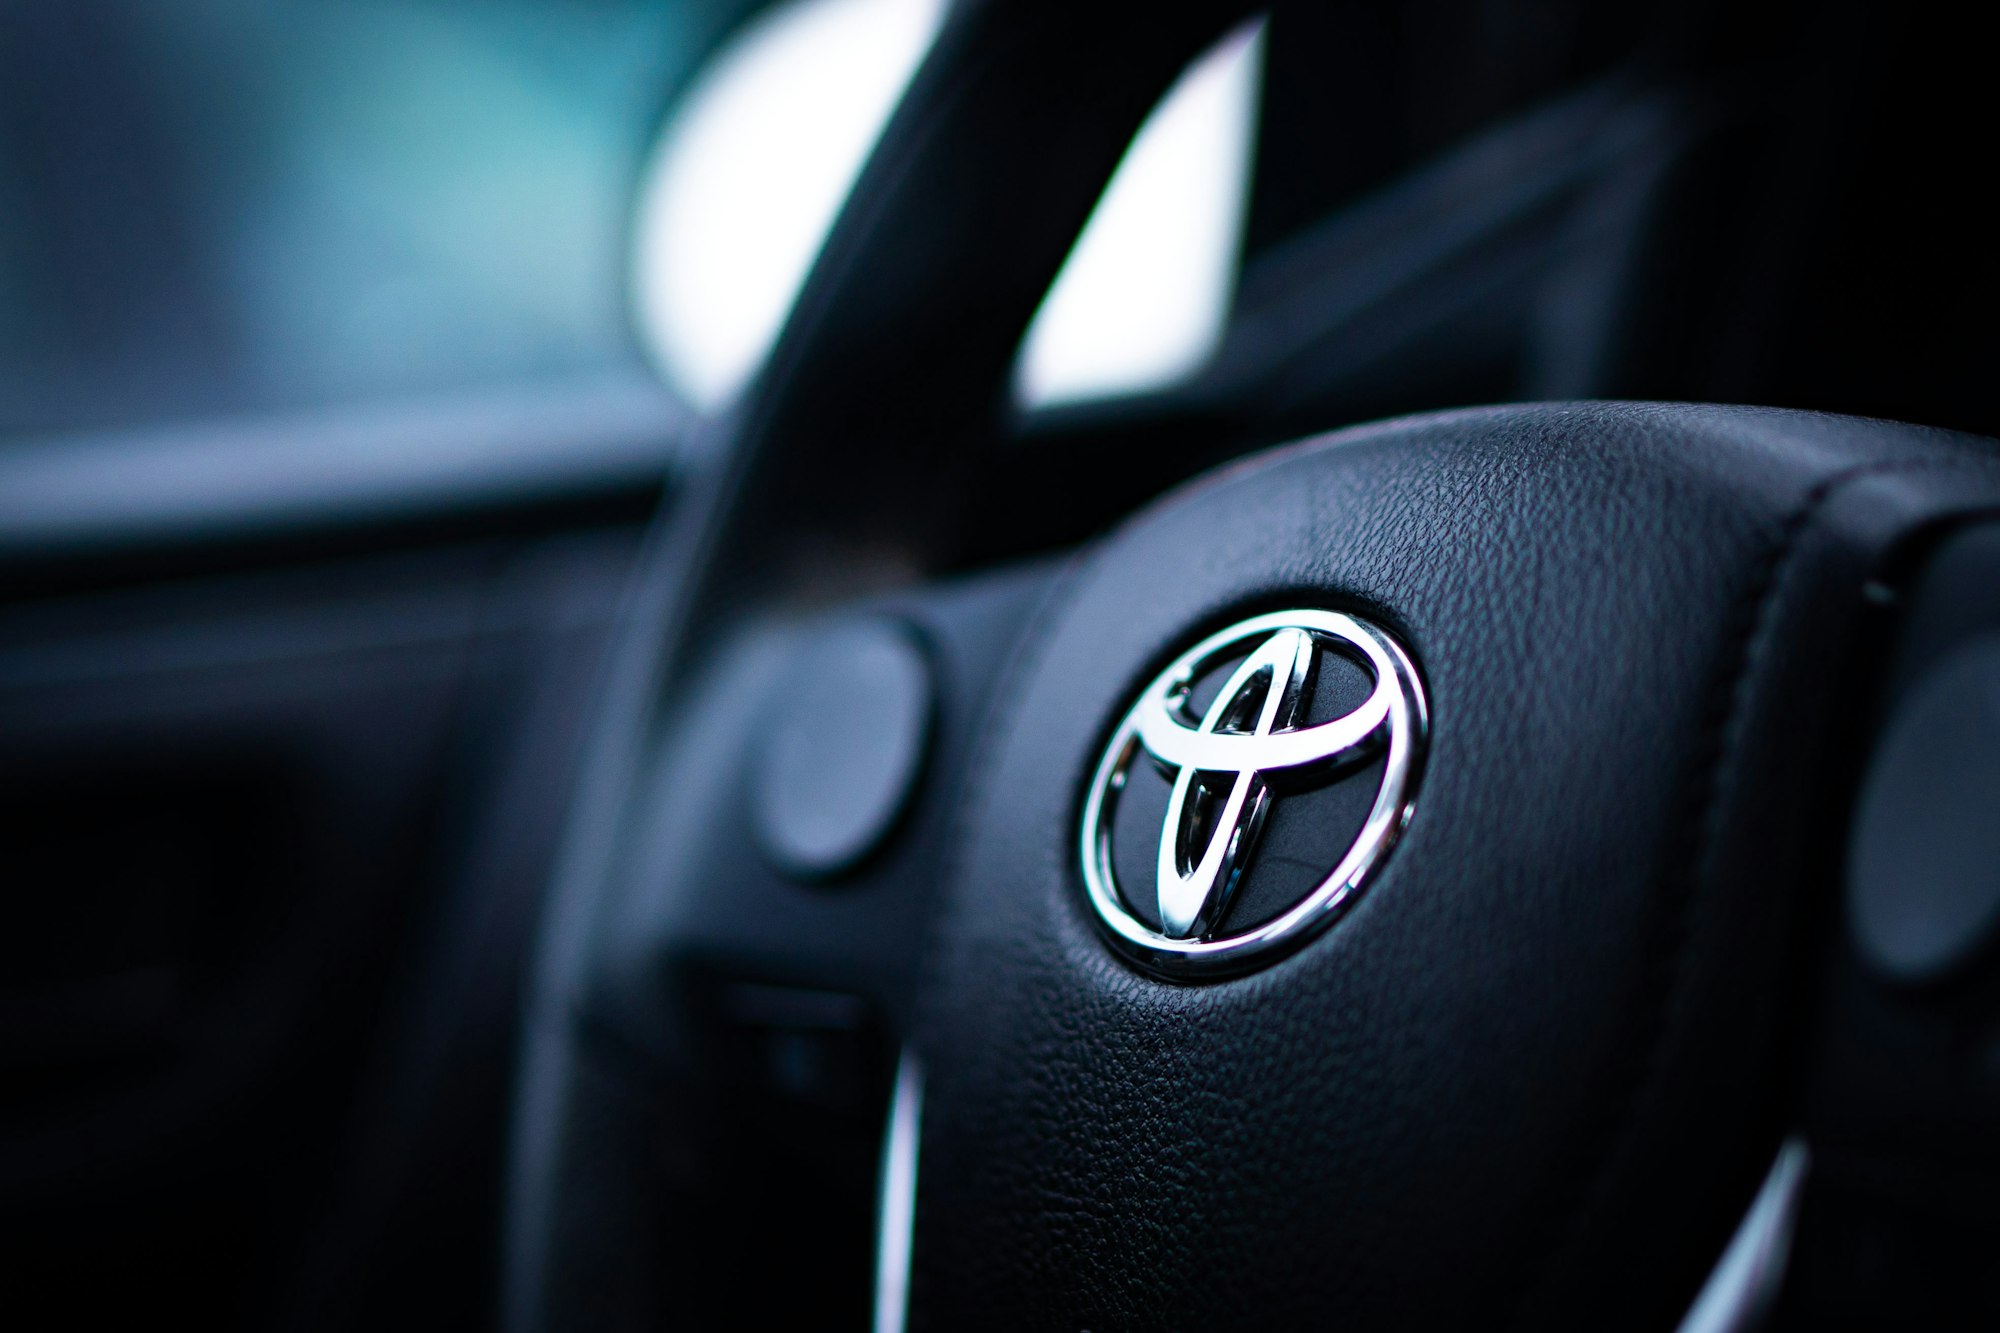 Toyota is unleashing a wave of cutting-edge innovations to electrify the automobile industry